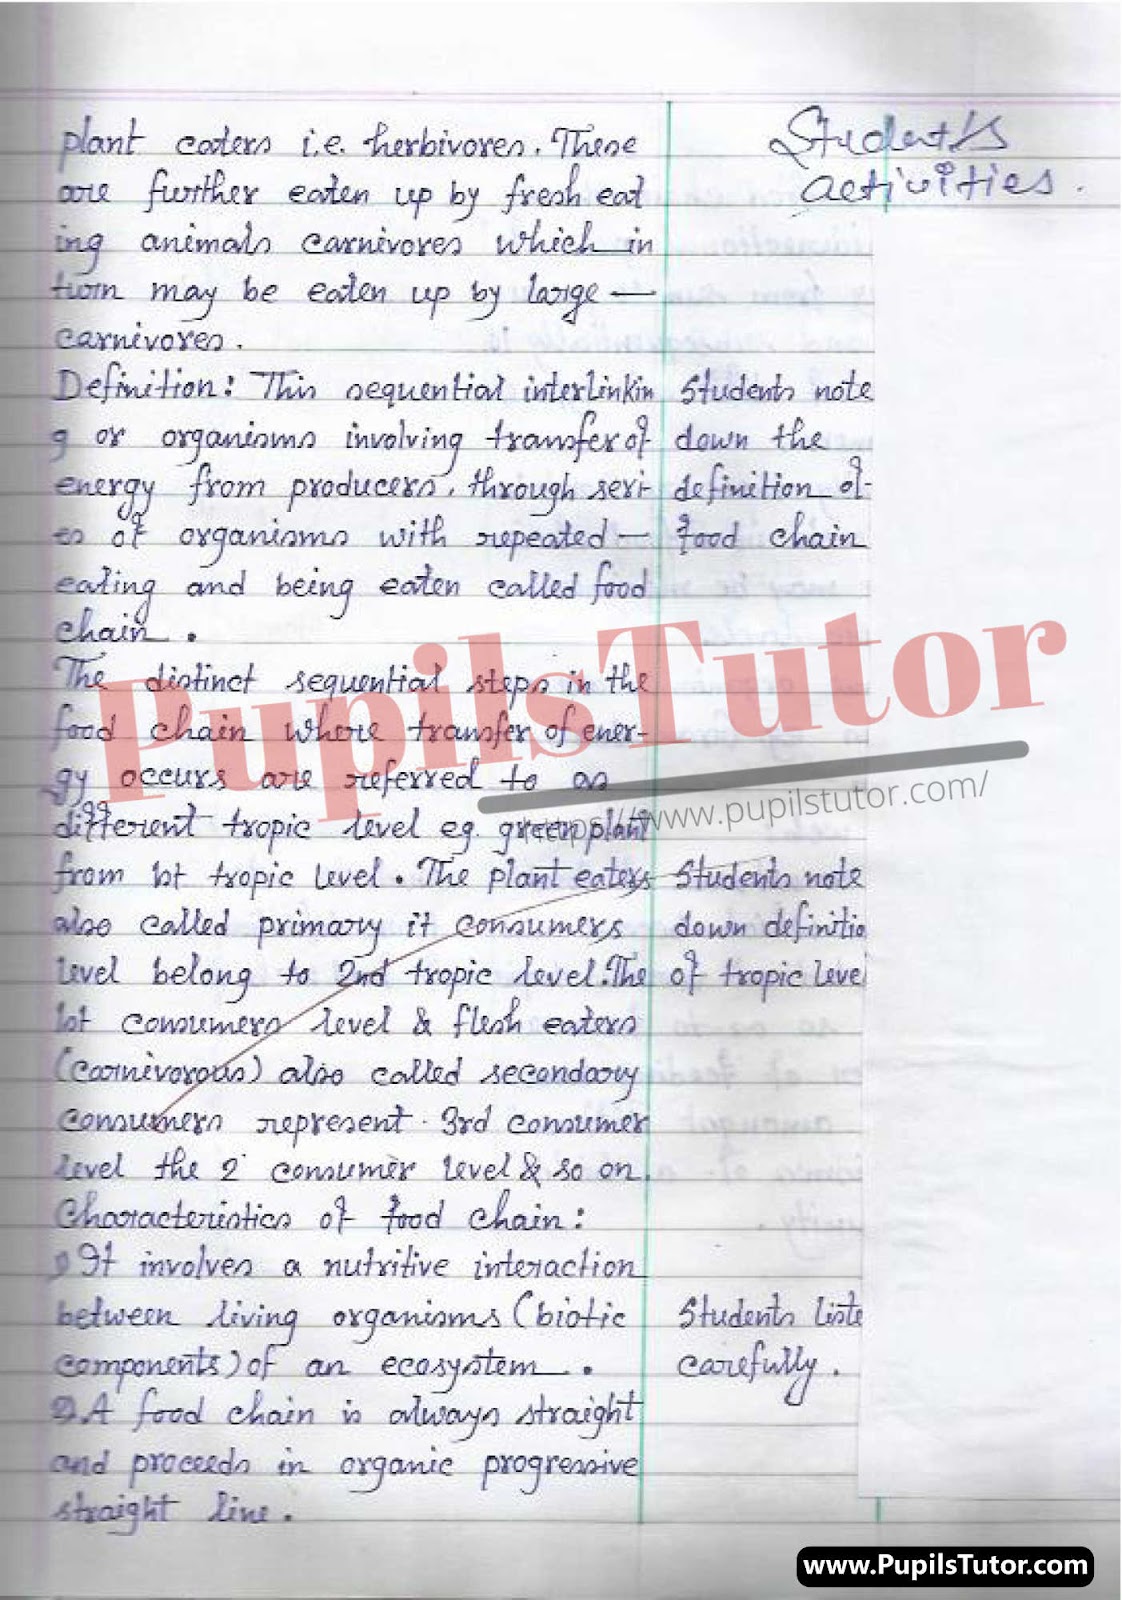 Class/Grade 4 To 8 Biological Science Simulated Teaching  Lesson Plan On Food Chain And Food Web For CBSE NCERT KVS School And University College Teachers – (Page And Image Number 3) – www.pupilstutor.com